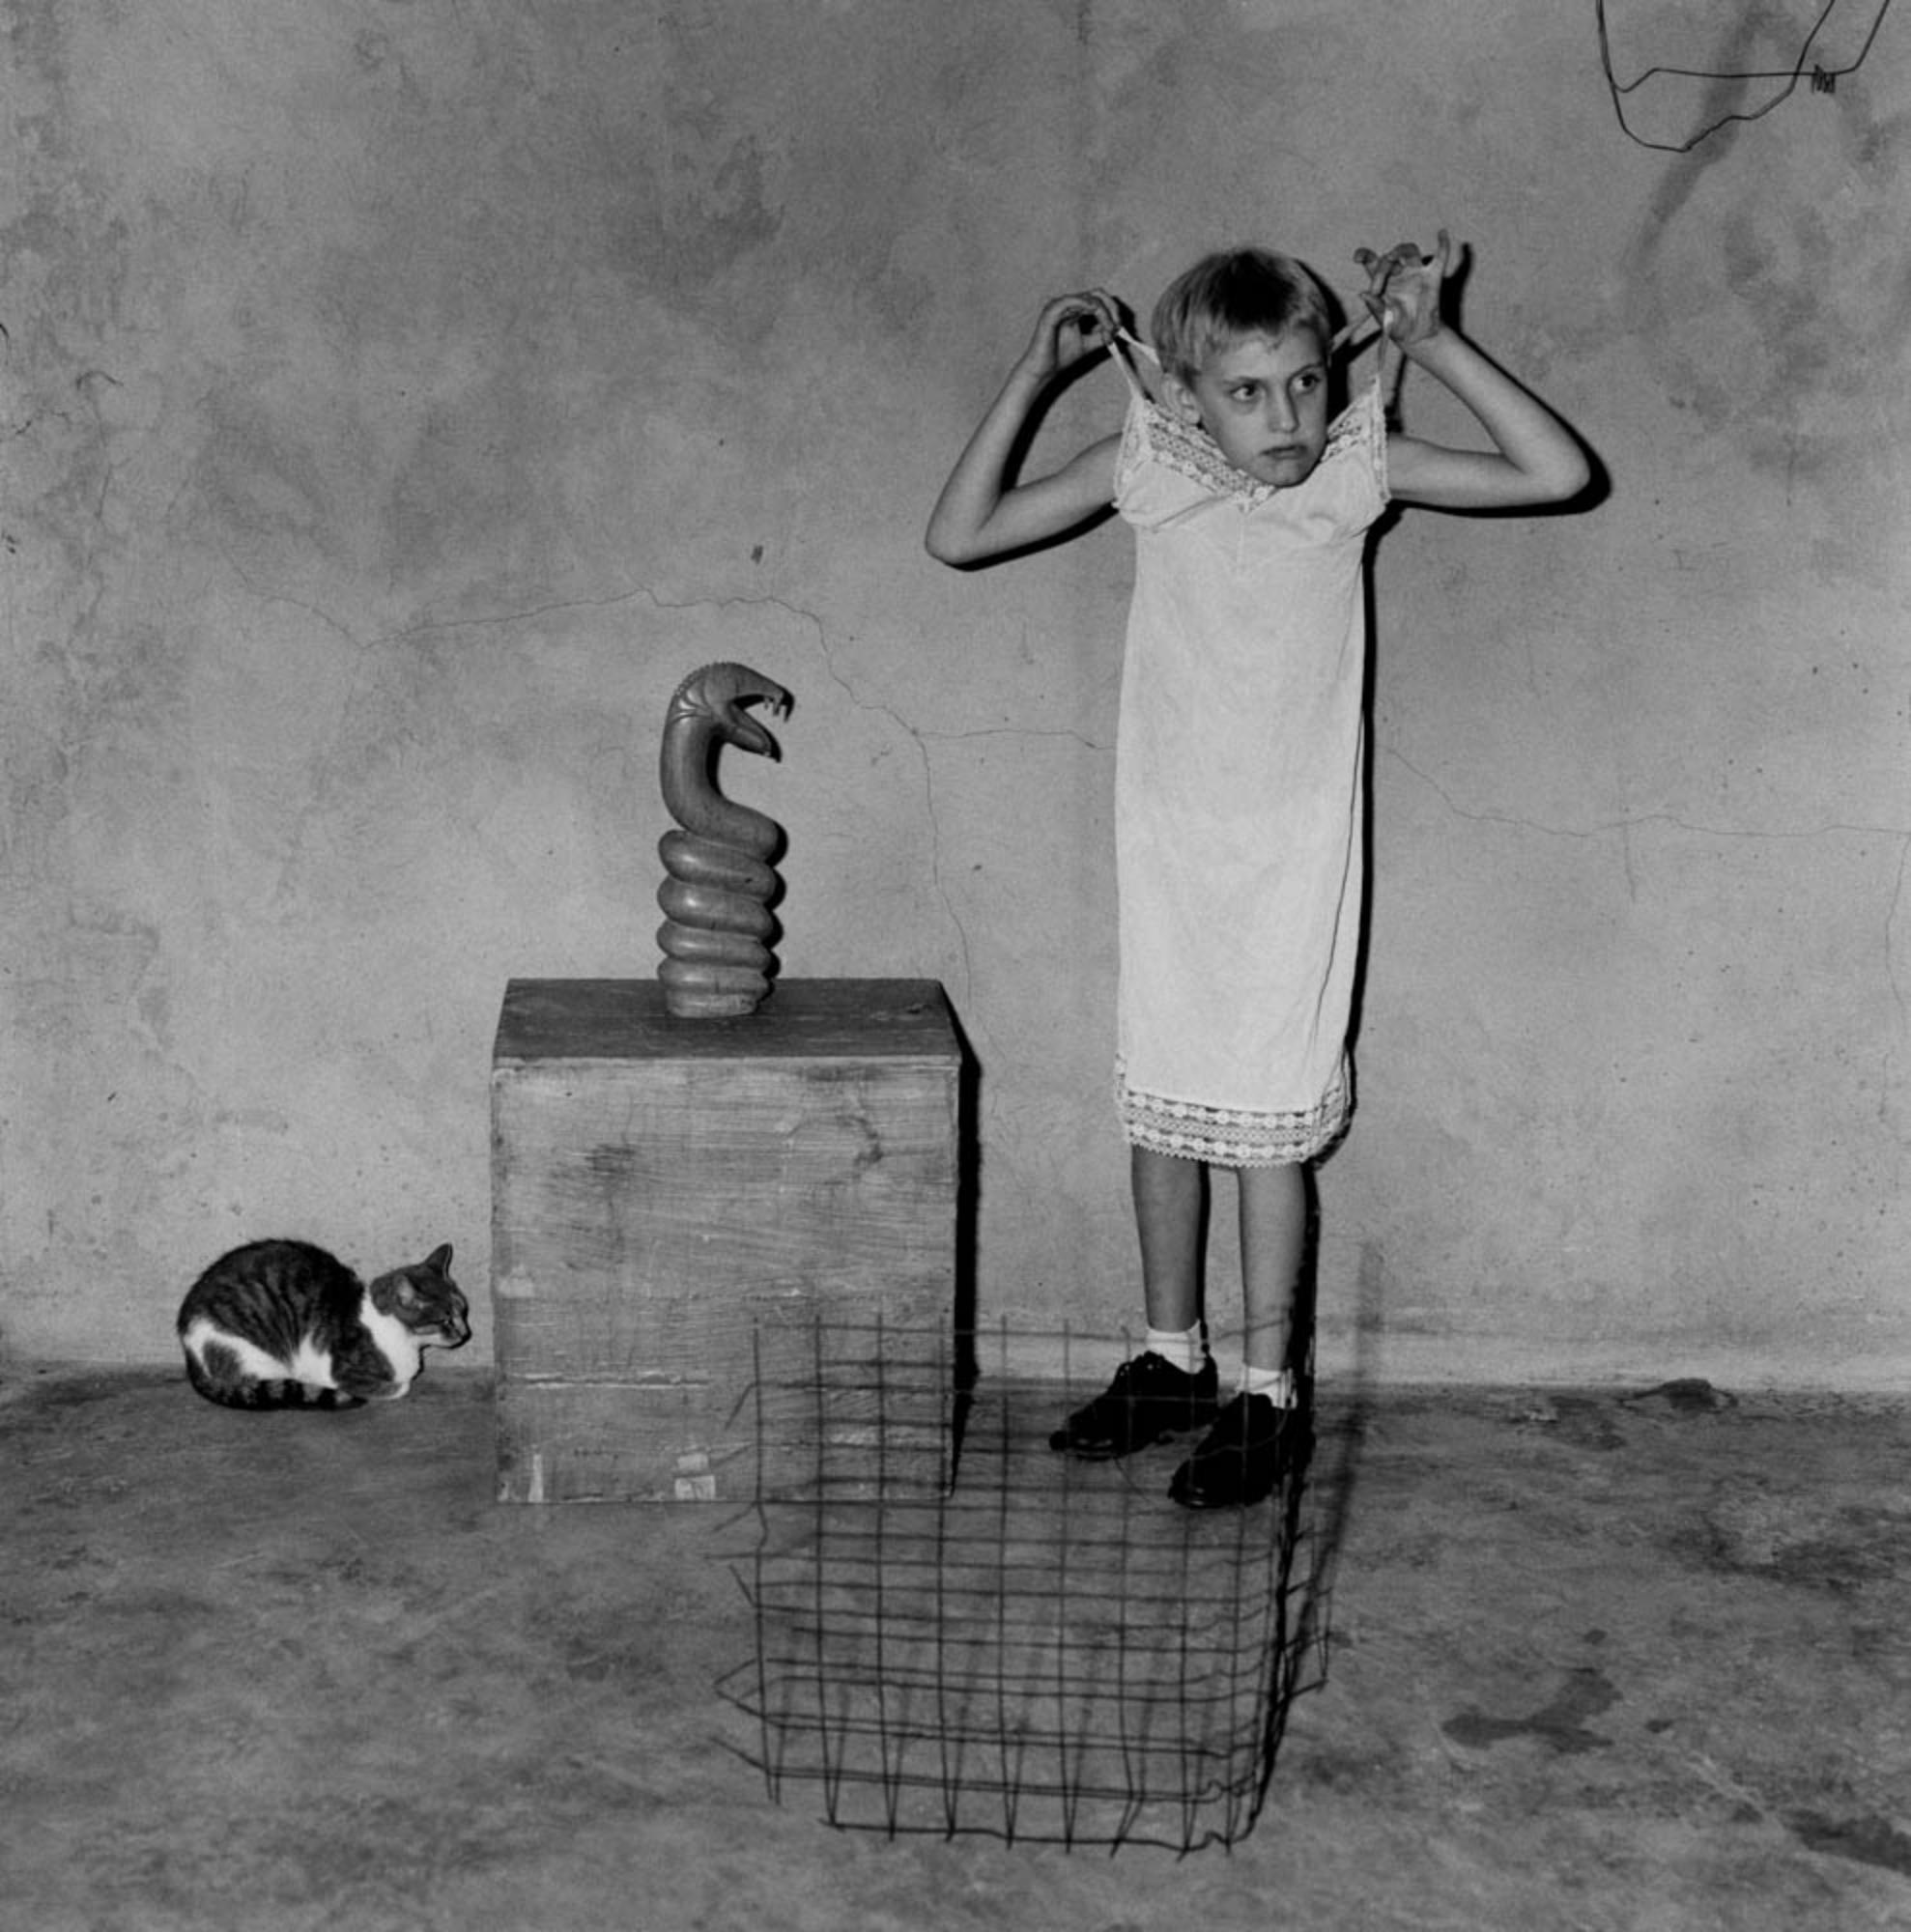 Roger BALLEN
Dress Up, 2002
Vintage silver gelatin print
Image 36 x 36 cm (14 1/8 x 14 1/8 in.)
Sheet 40 x 40 cm (15 3/4 x 15 3/4 in.)
Edition of 4 (#2/4)
Signed and dated verso in pencil
Print only

Christophe Guye Galerie offers a selection of